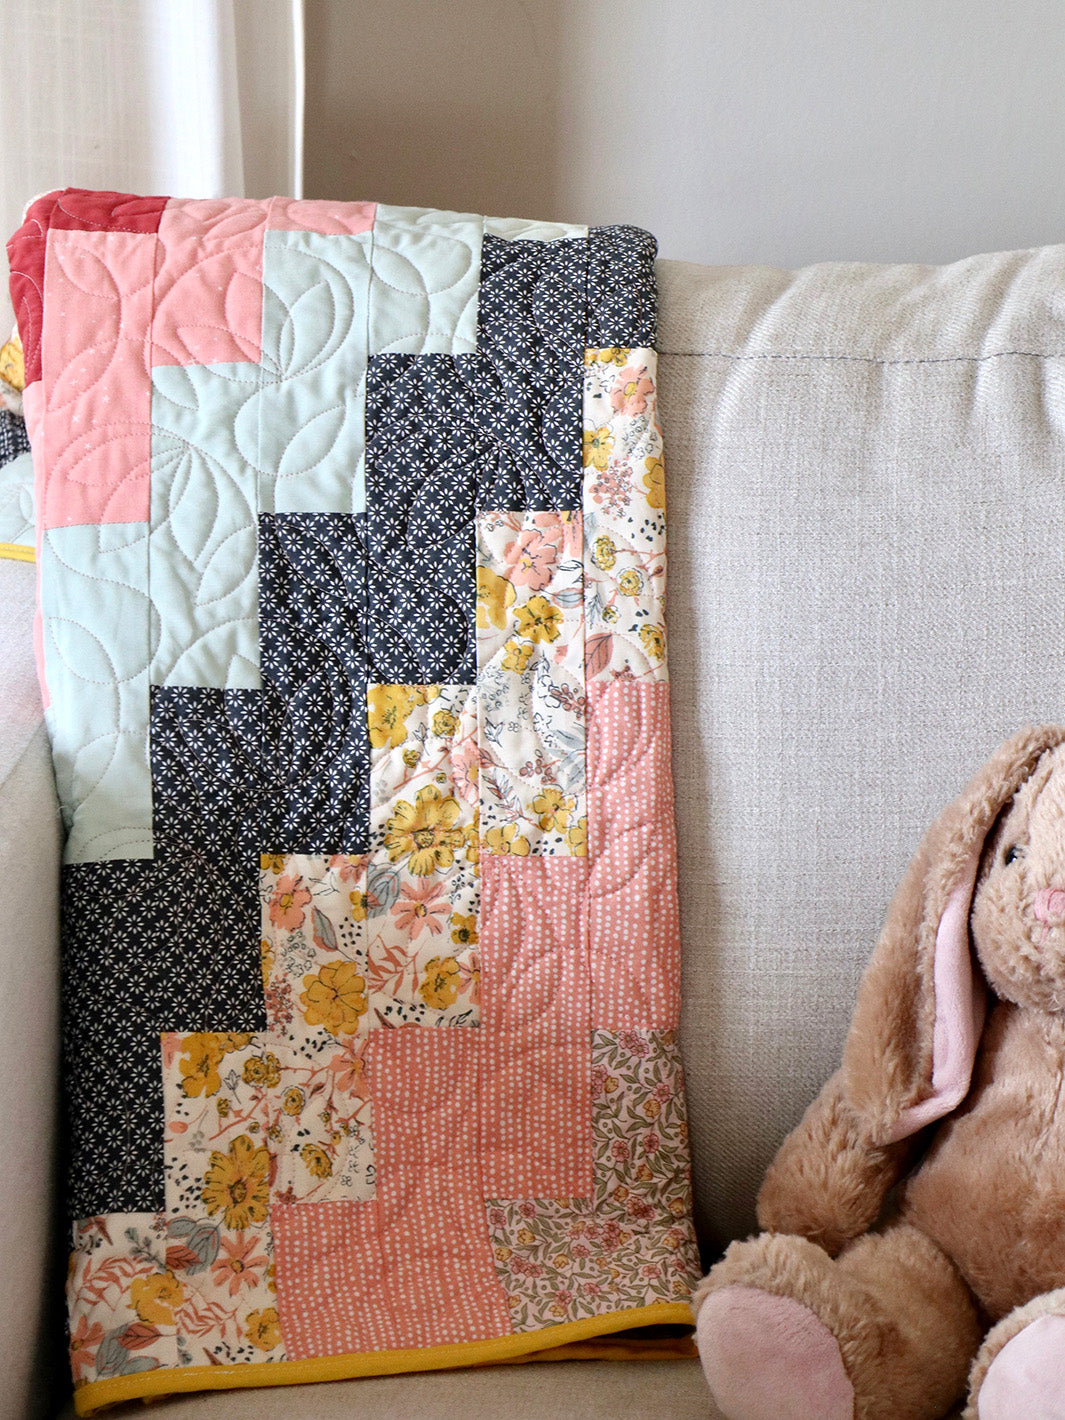 Modern Handmade Baby Quilt - Baby Steps Earthly Comfort Home Decor -6